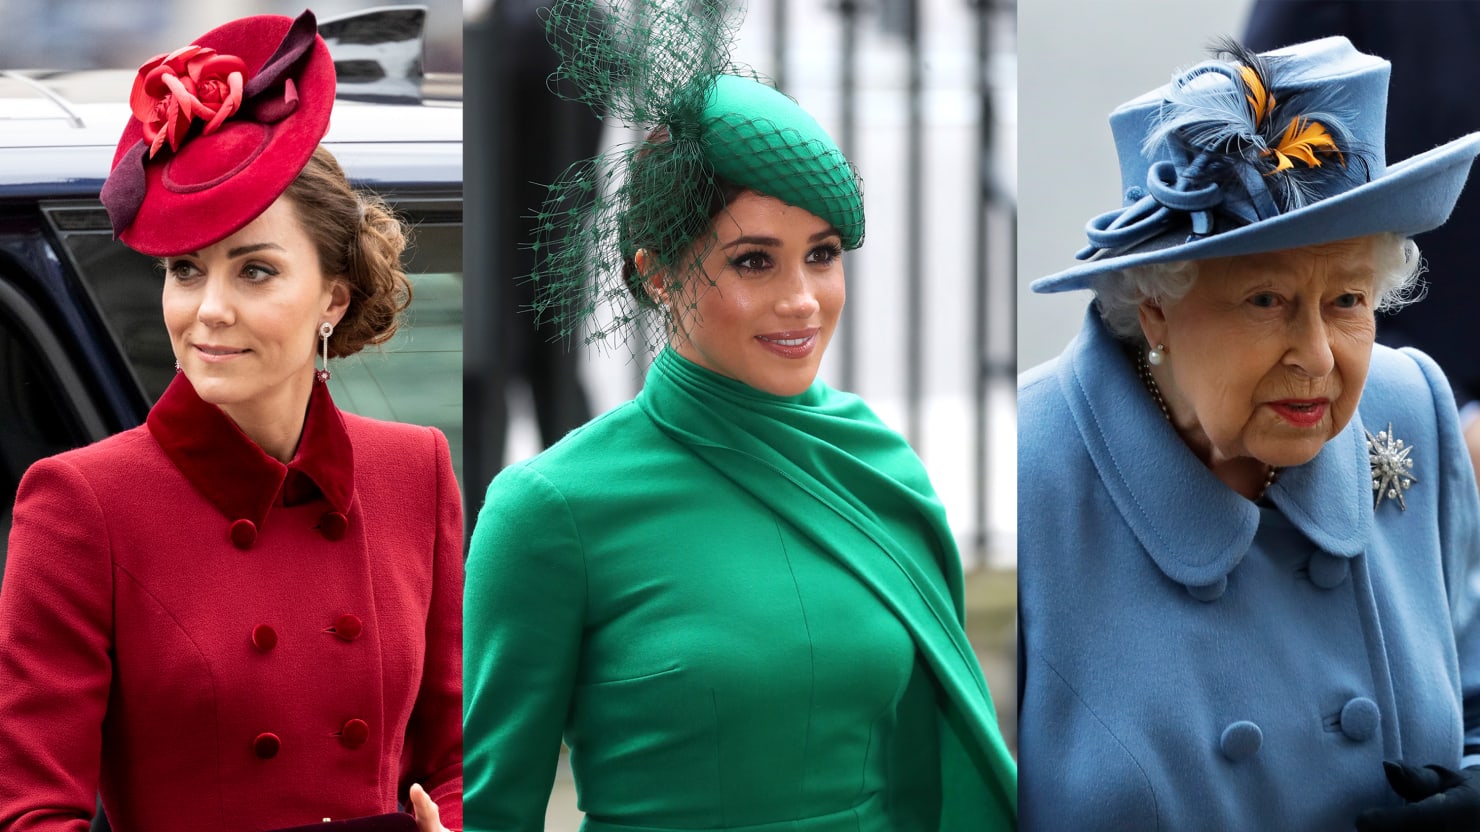 Meghan Markle’s Final Royal Fashion Message, Dressed in Dramatic Green ...